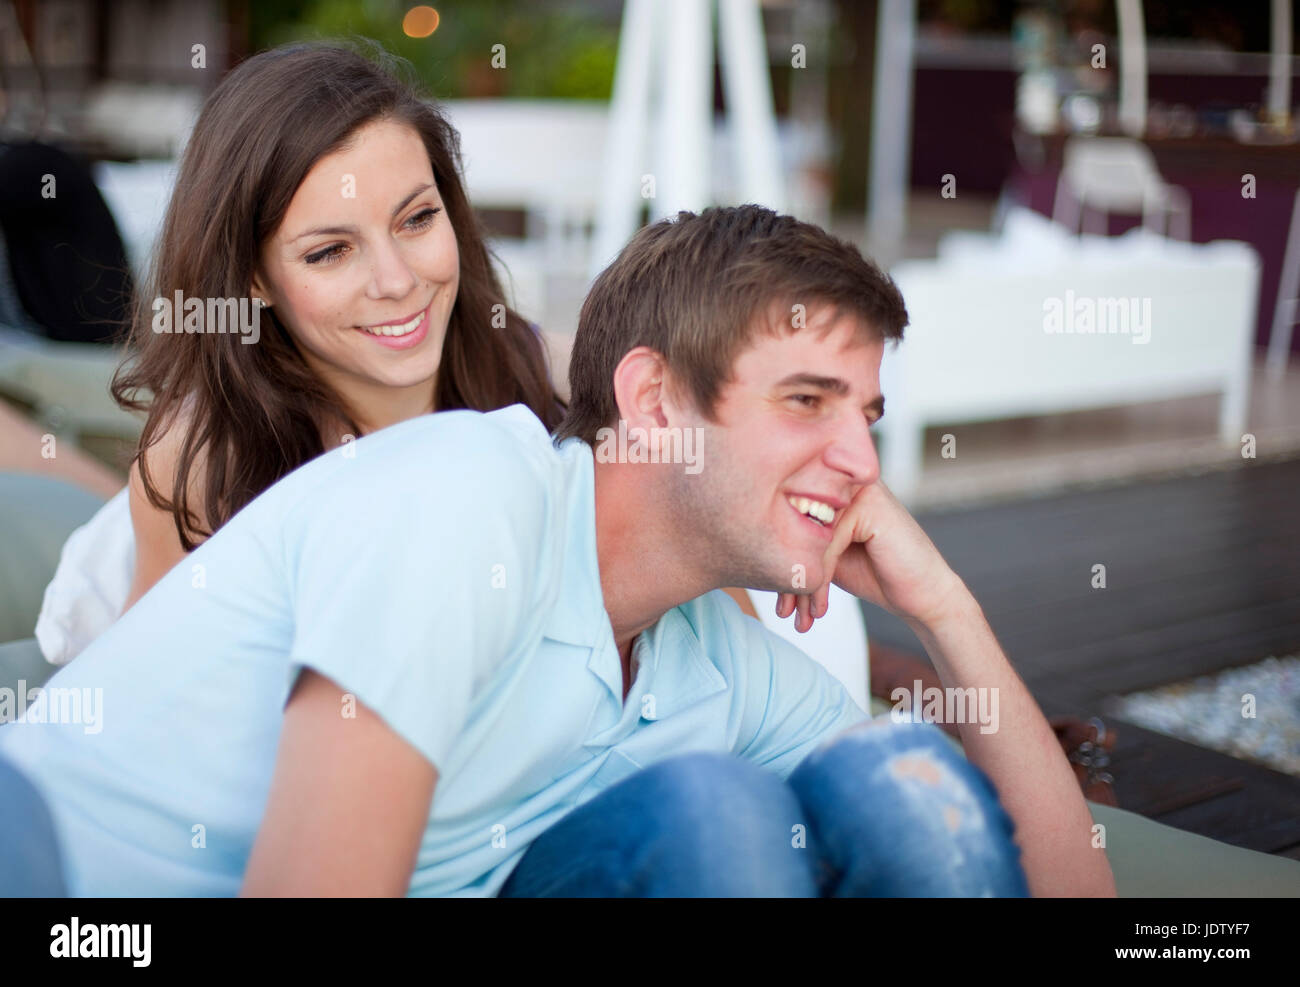 Smiling couple relaxing together Stock Photo